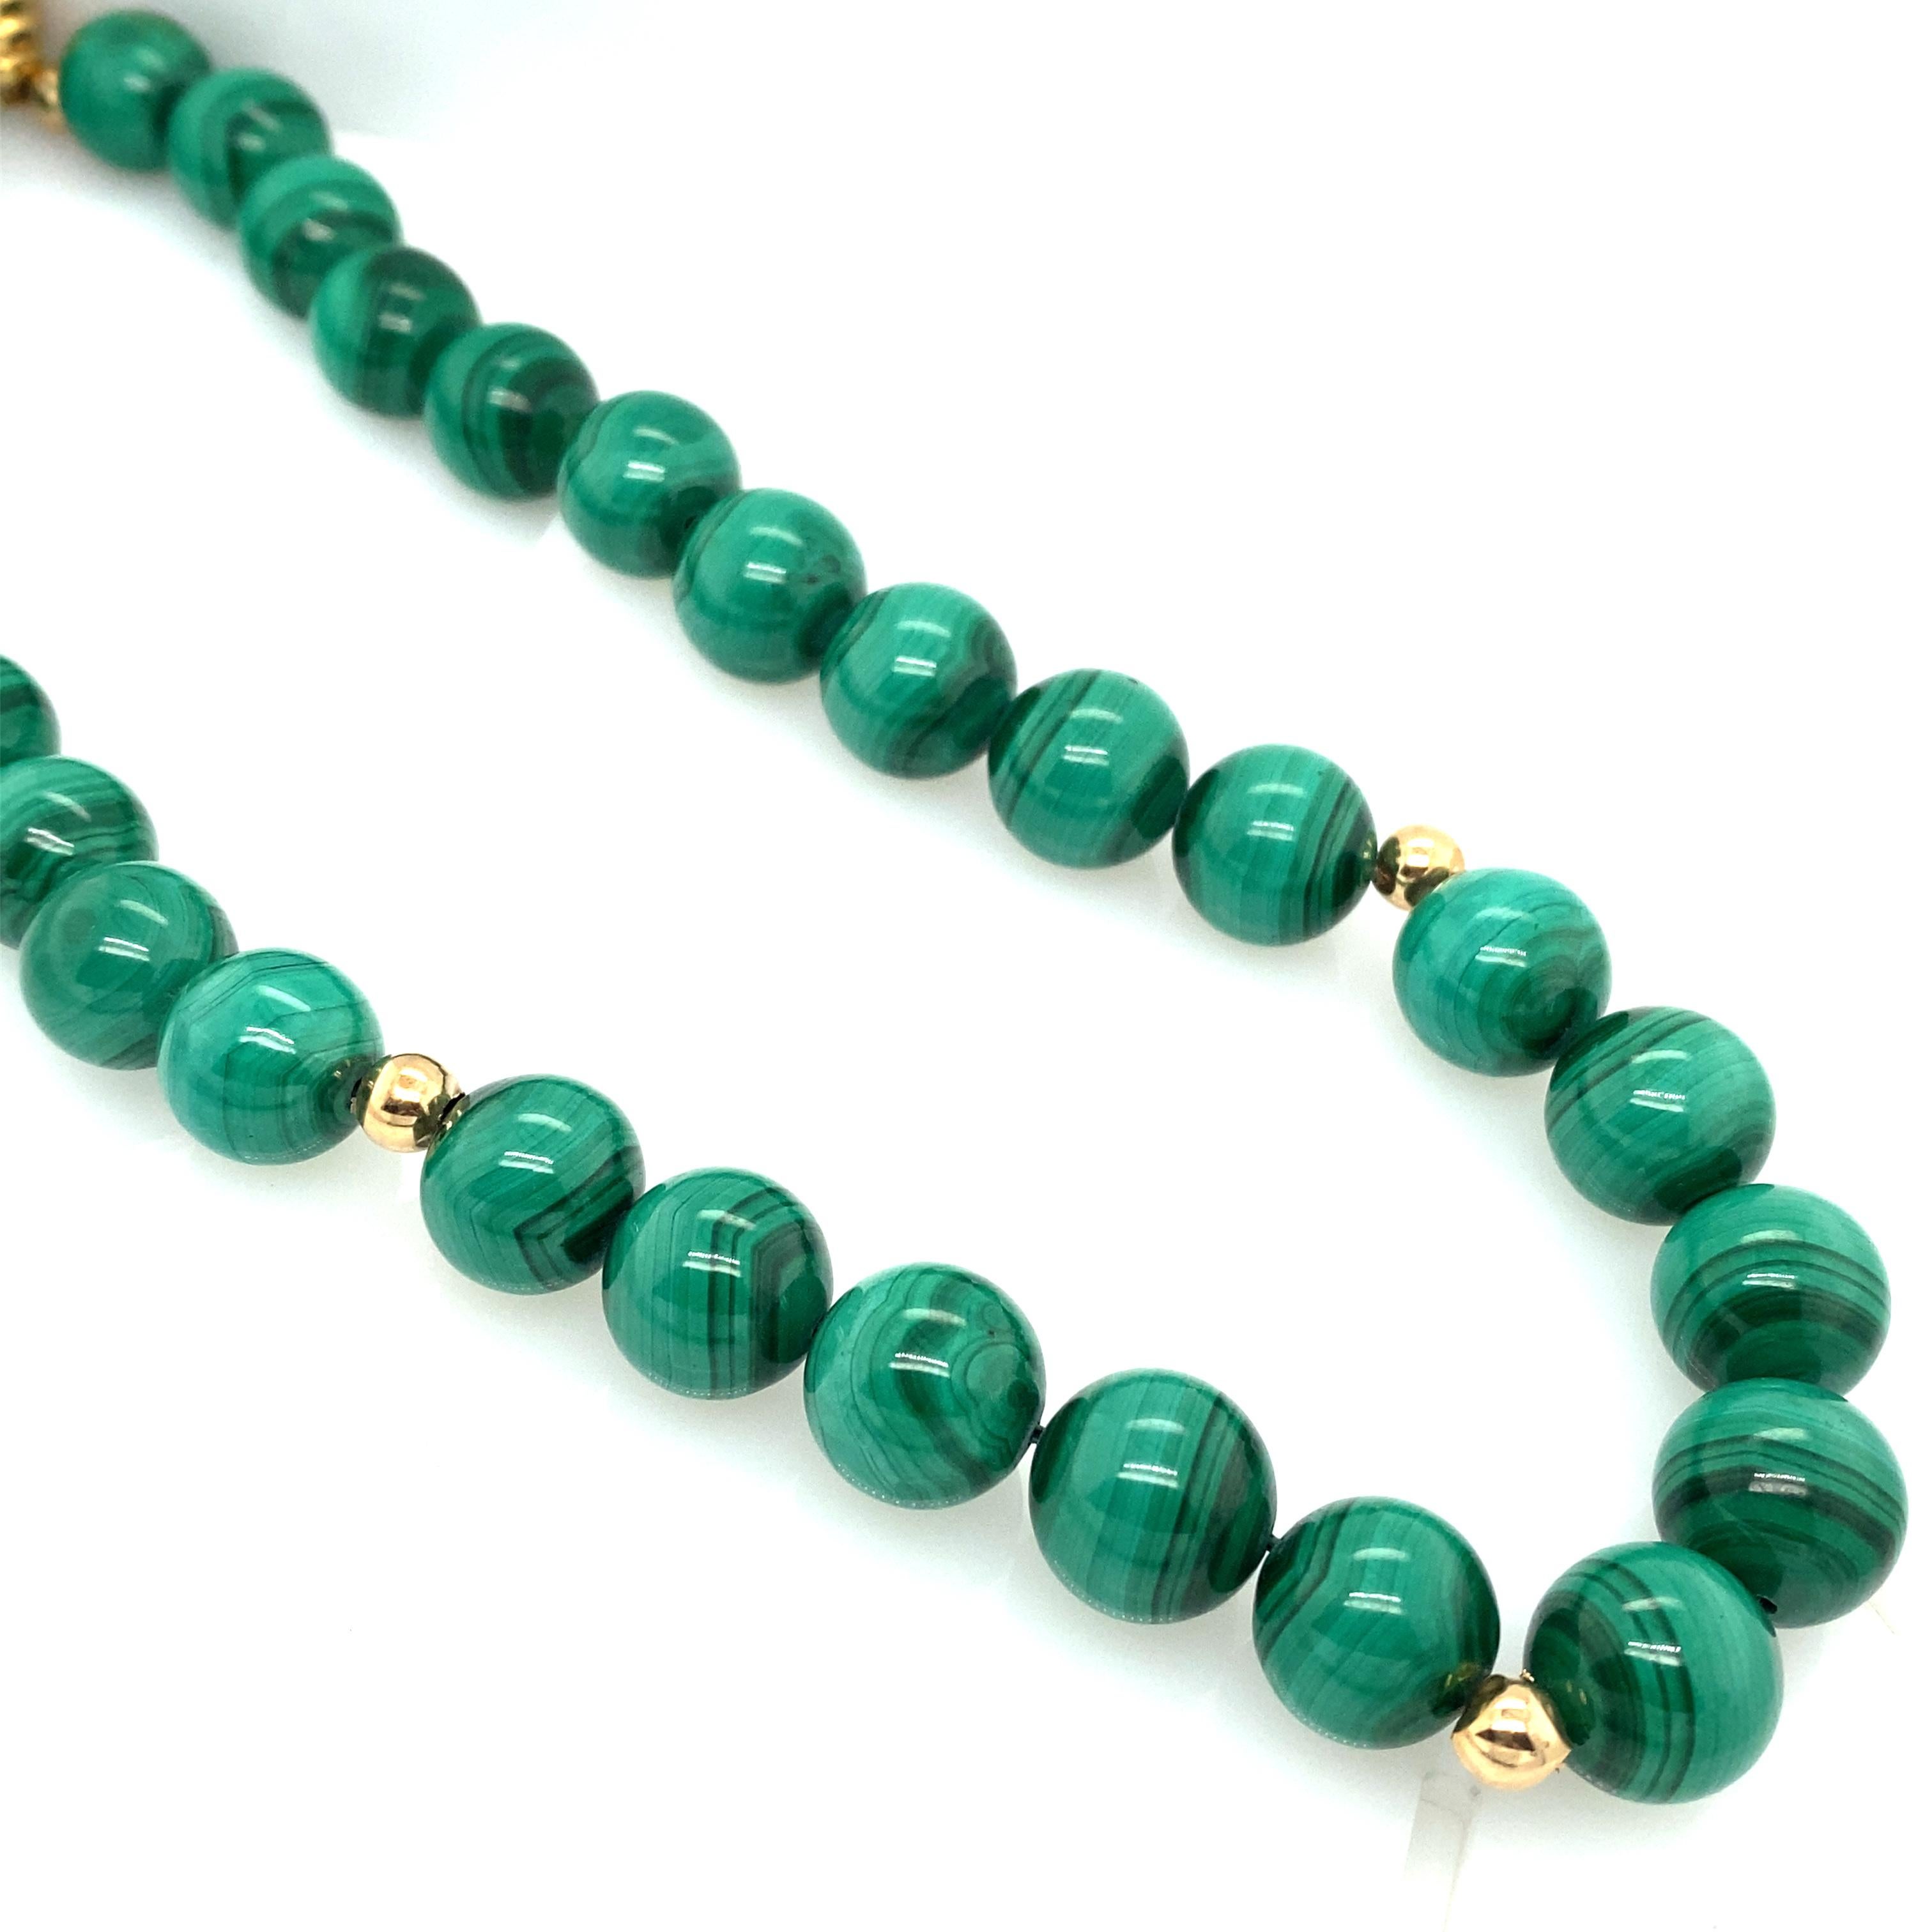 Item Details: This necklace has vibrant green malachite beads with gold bead spacers and a pearl clasp of 14 karat yellow gold. It is wonderful as a pop of color or a statement piece!

Circa: 1990s
Metal Type: 14 Karat Yellow Gold
Weight: 148.9